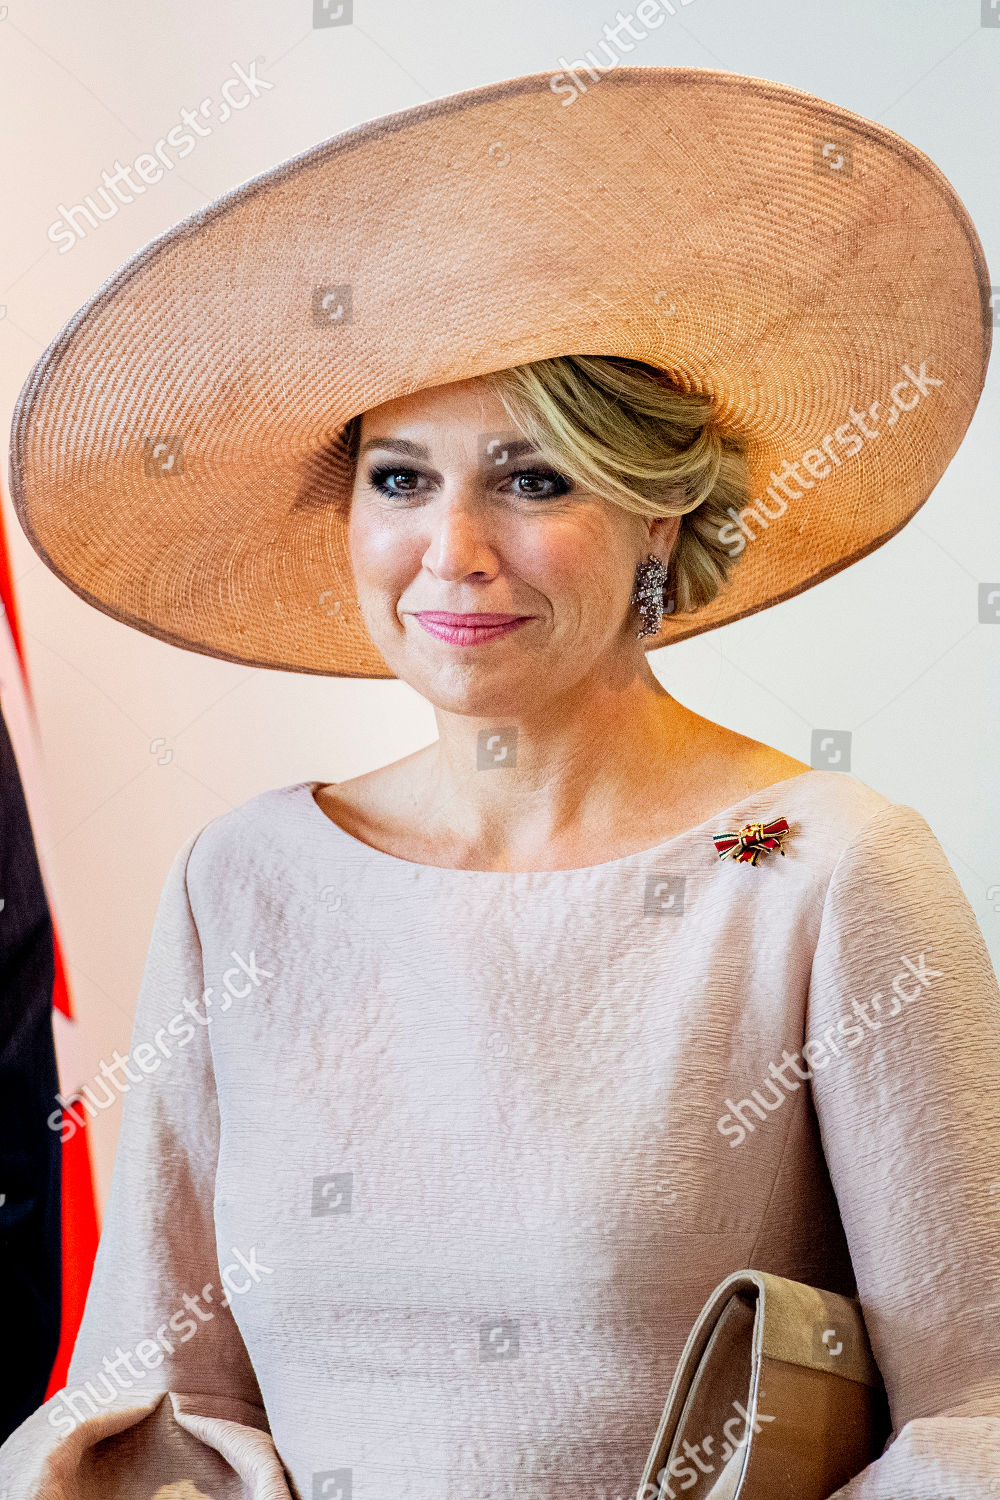 king-willem-alexander-and-queen-maxima-visit-to-germany-shutterstock-editorial-10243489bt.jpg